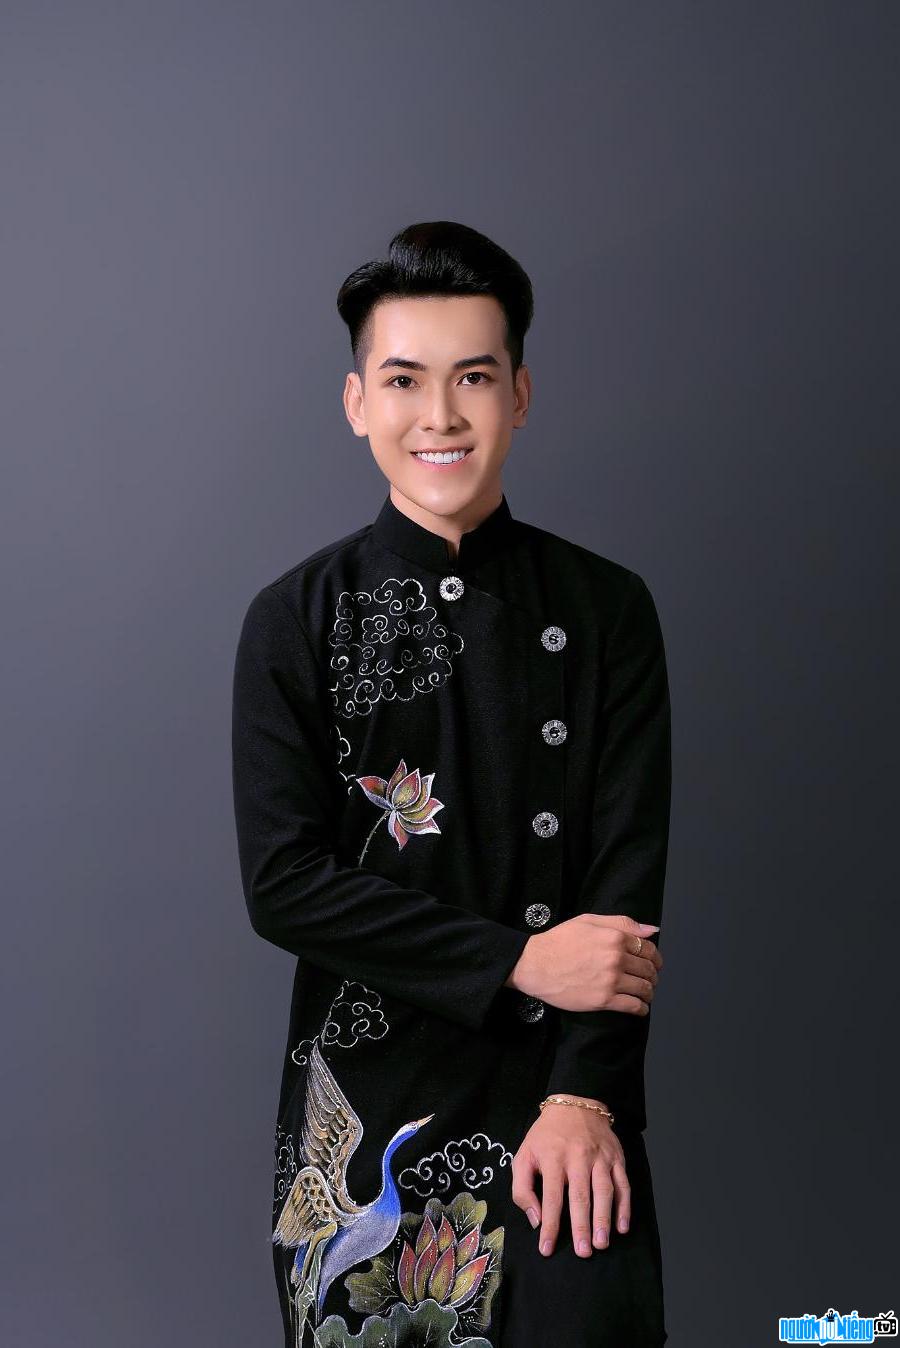  Image of singer Lam Hoai Phong with a bright smile